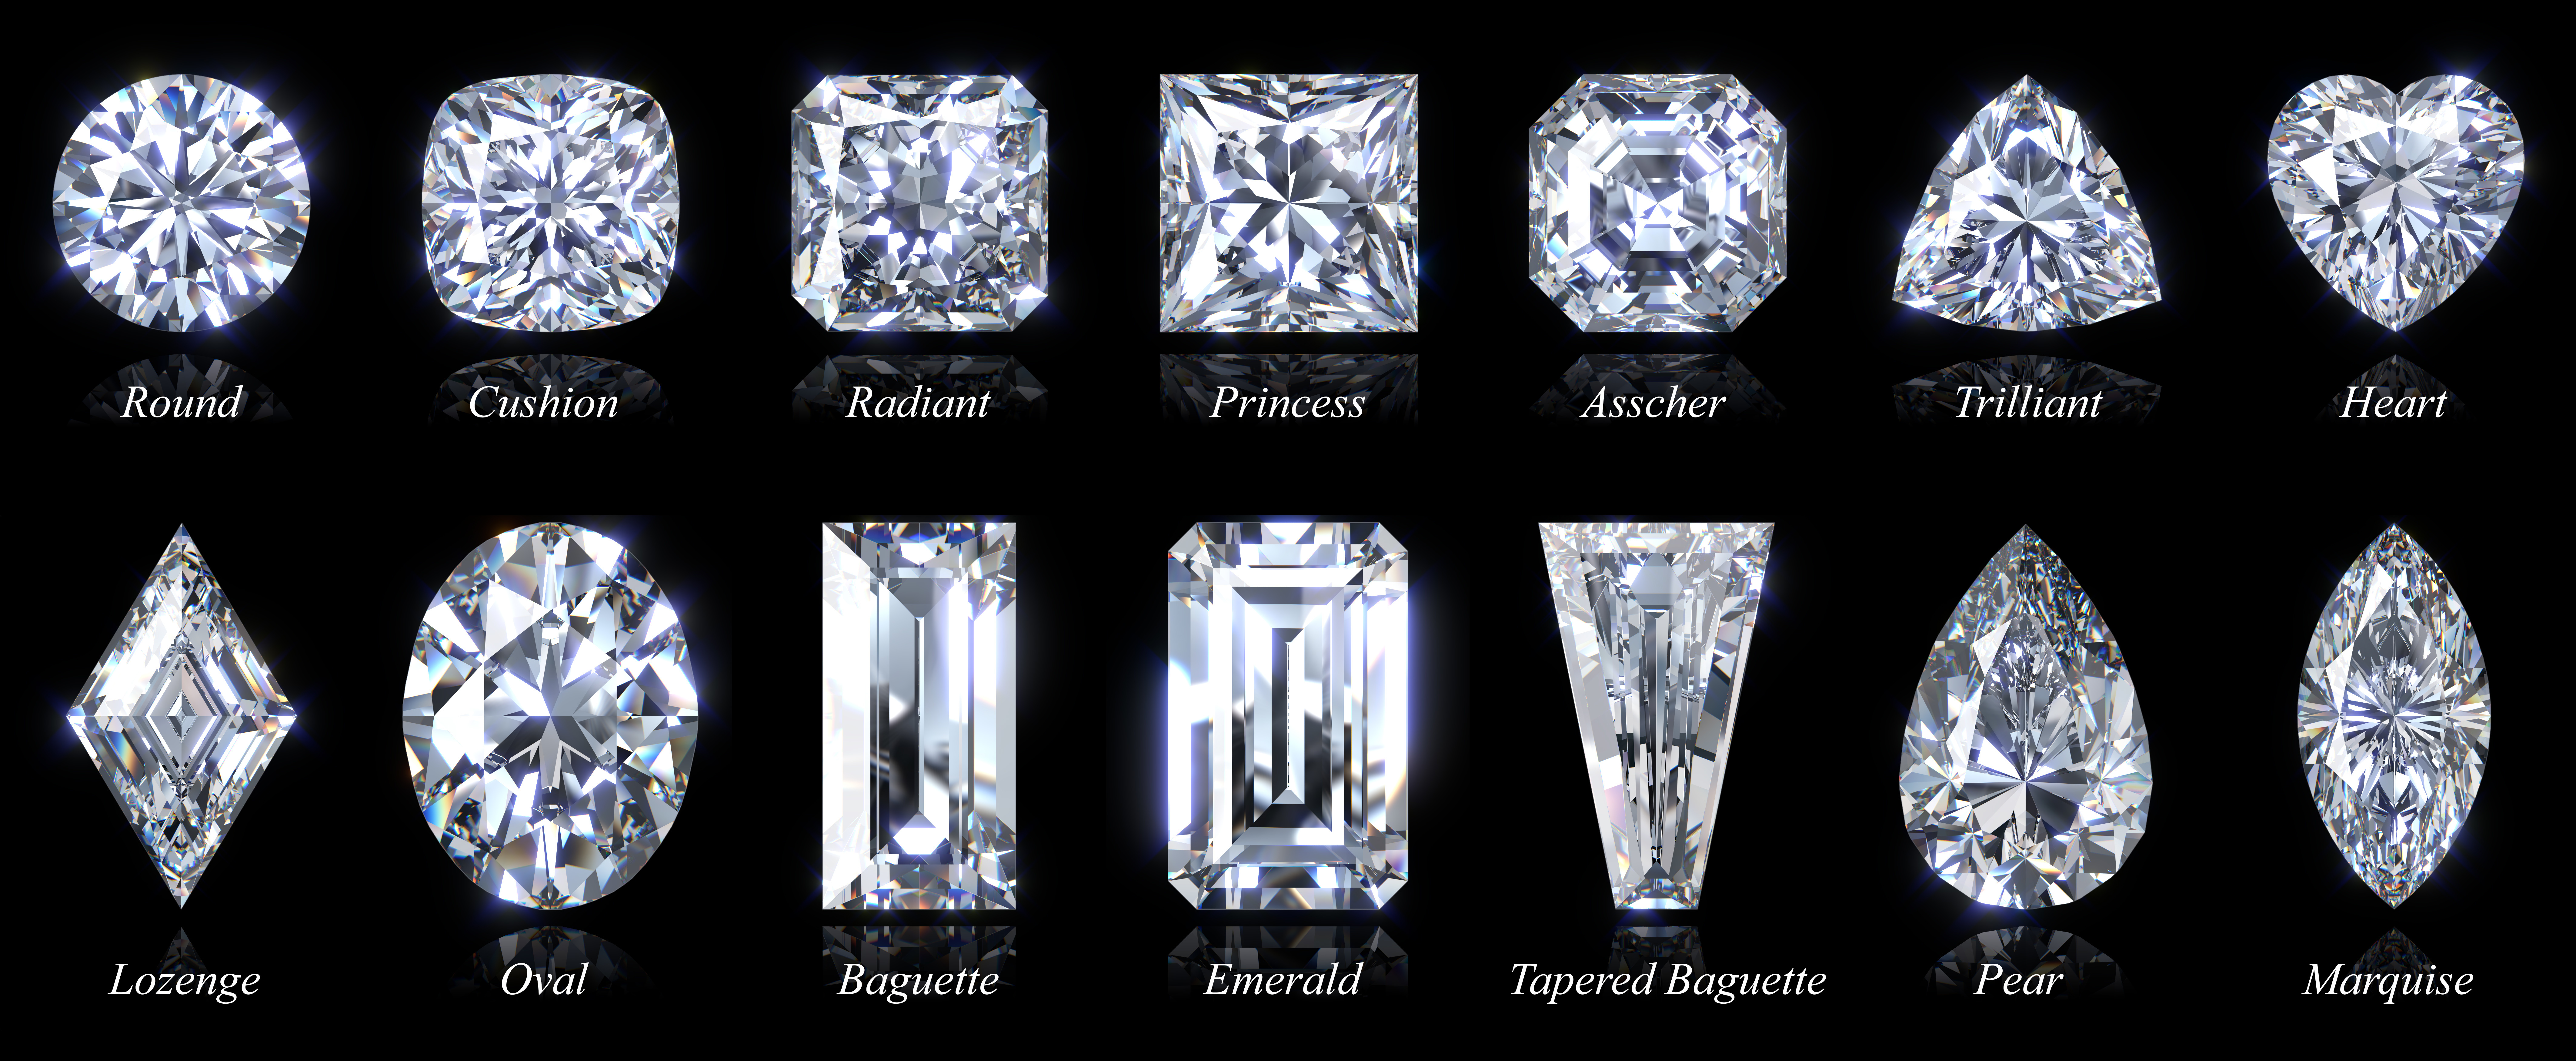 Fourteen Popular Diamond Shapes With Titles Isolated On Black